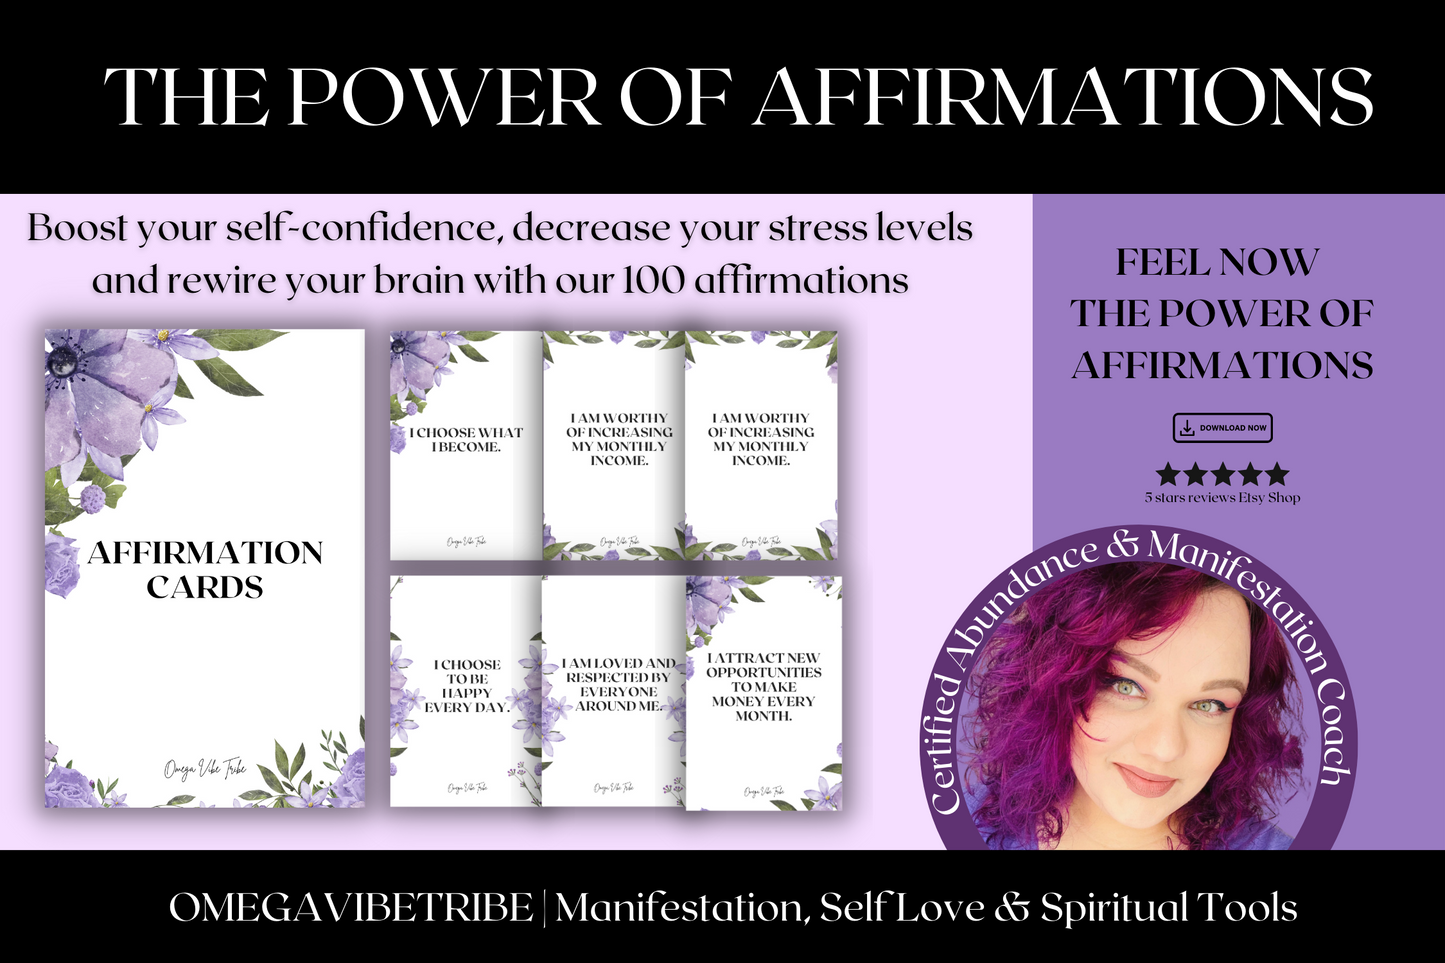 boos your self confidence, decrease your stress levels and rewire your brain with these 100 affirmations that are ready to be printed out